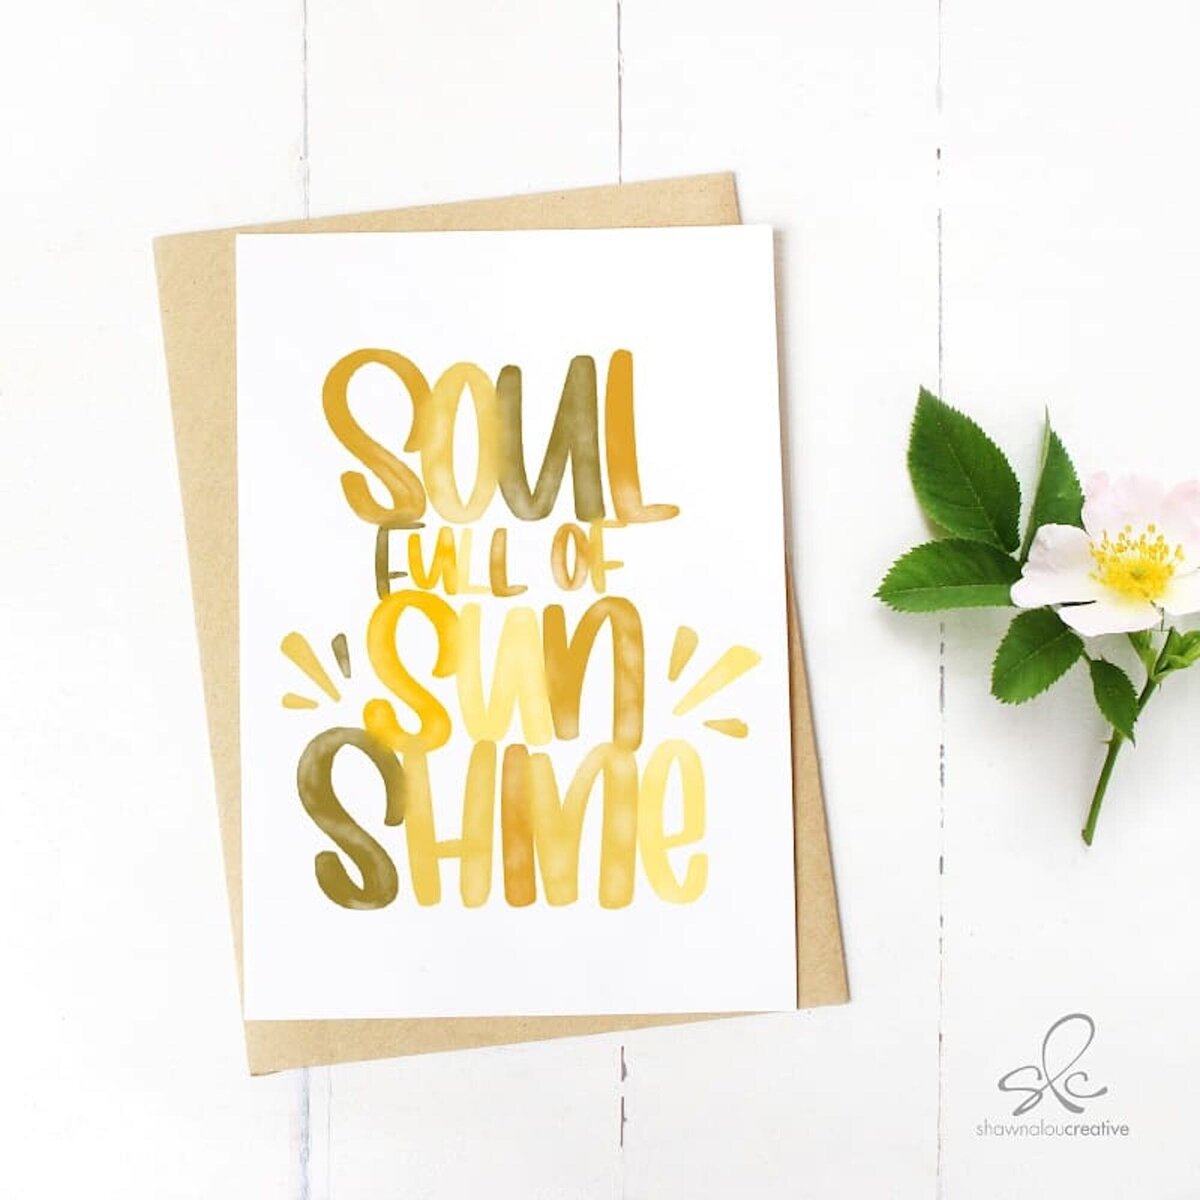 Custom greeting card with hand drawn text "soul full of sunshine"